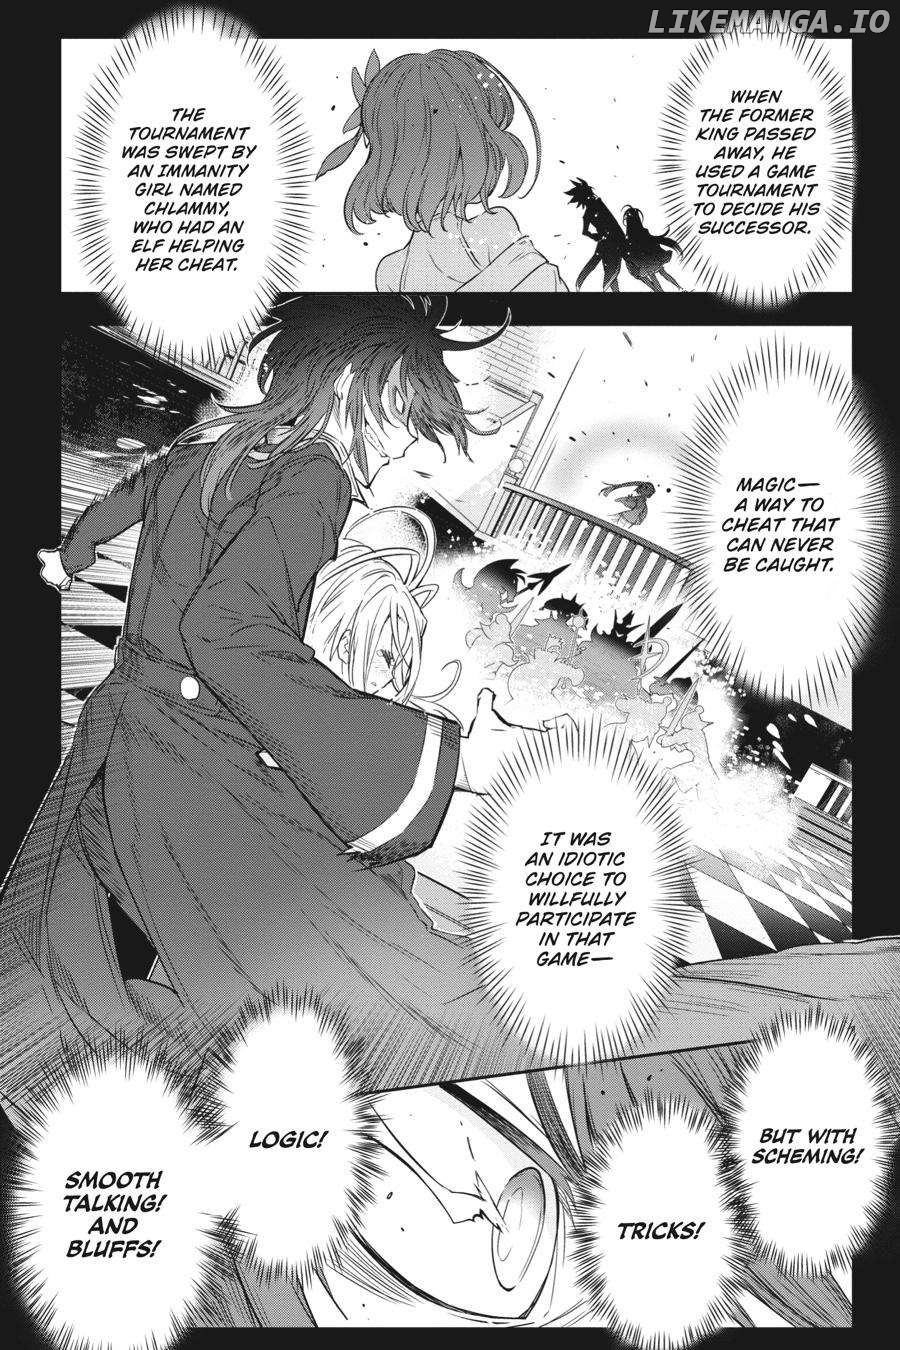 No Game No Life Chapter 2 - Eastern Union Arc Chapter 1 - page 20